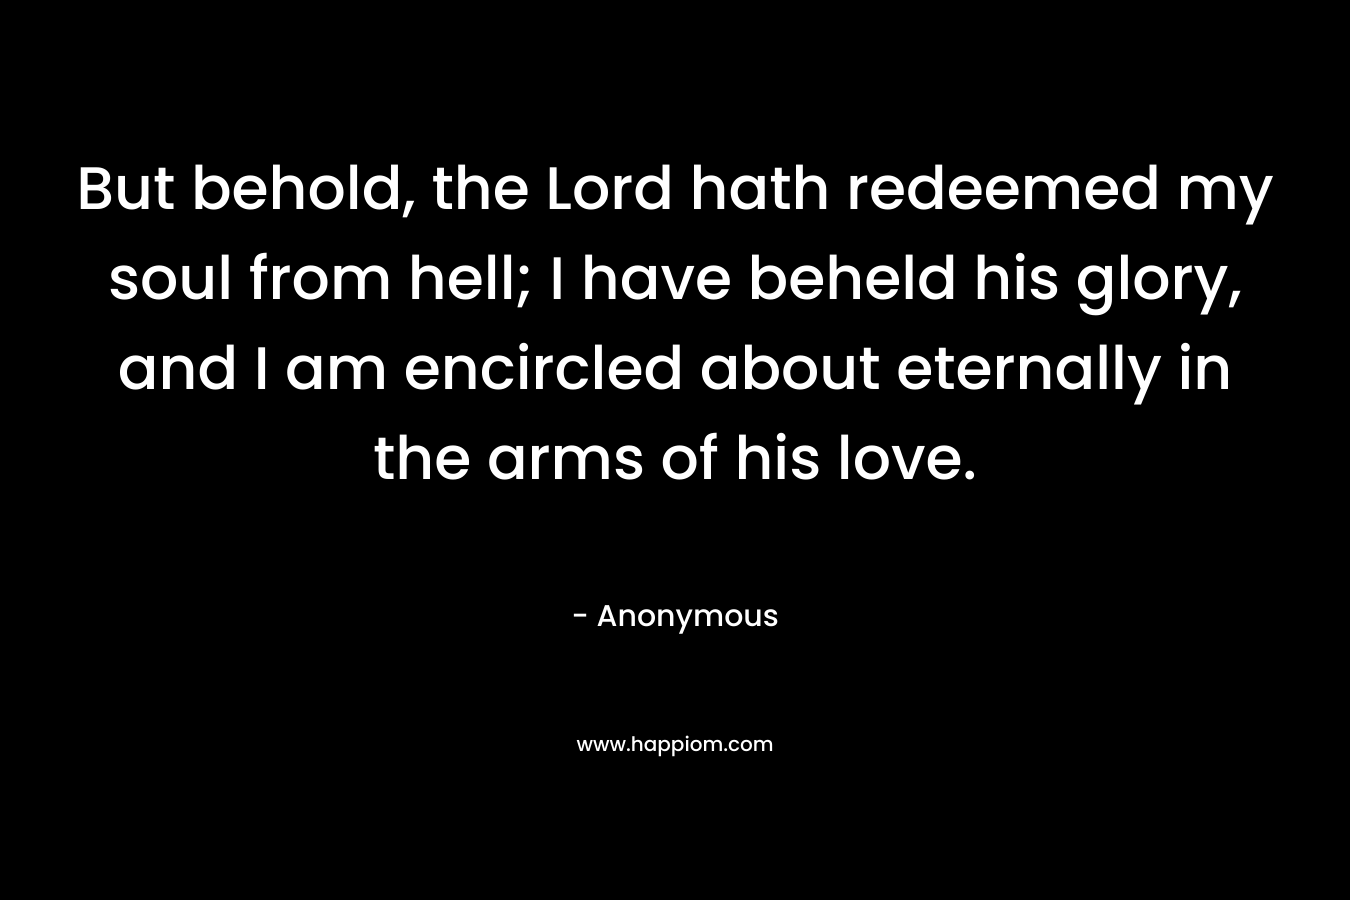 But behold, the Lord hath redeemed my soul from hell; I have beheld his glory, and I am encircled about eternally in the arms of his love. – Anonymous